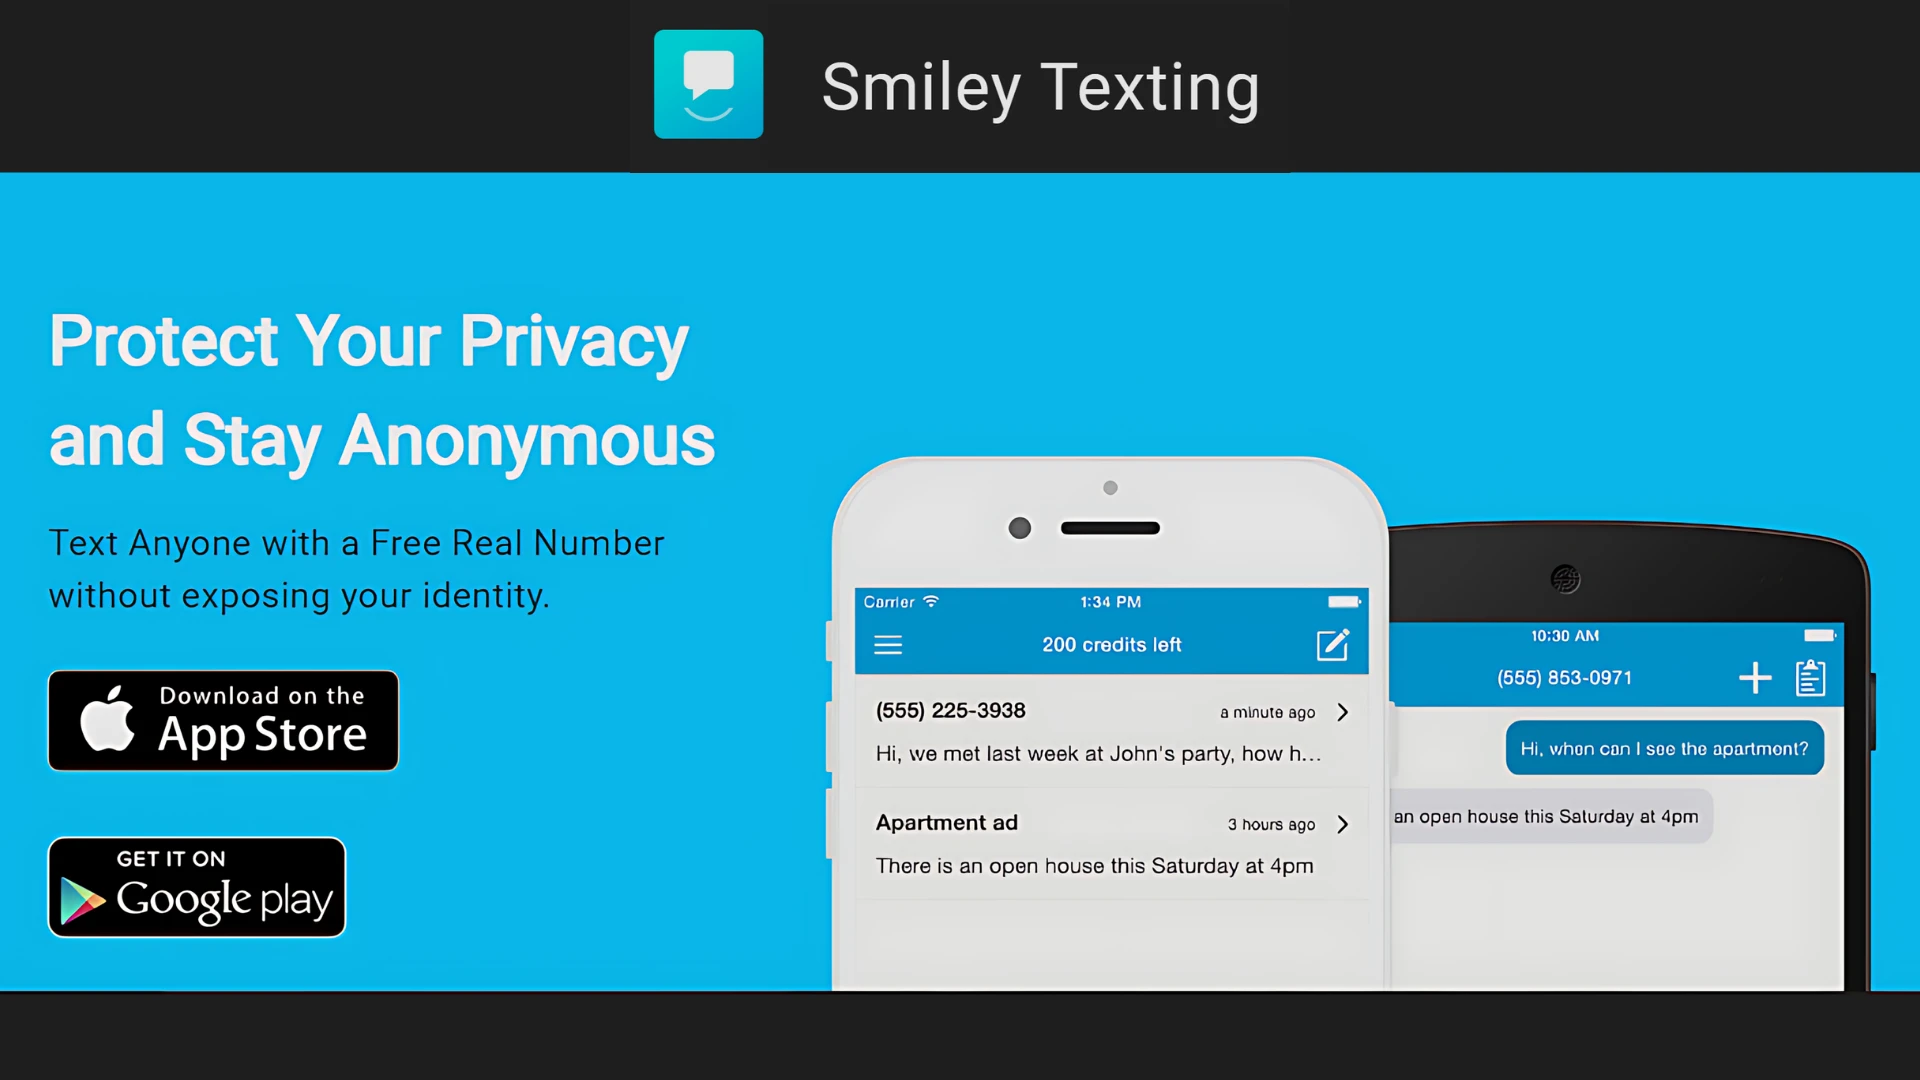 How can you text someone who has blocked you using Smiley Private Texting?